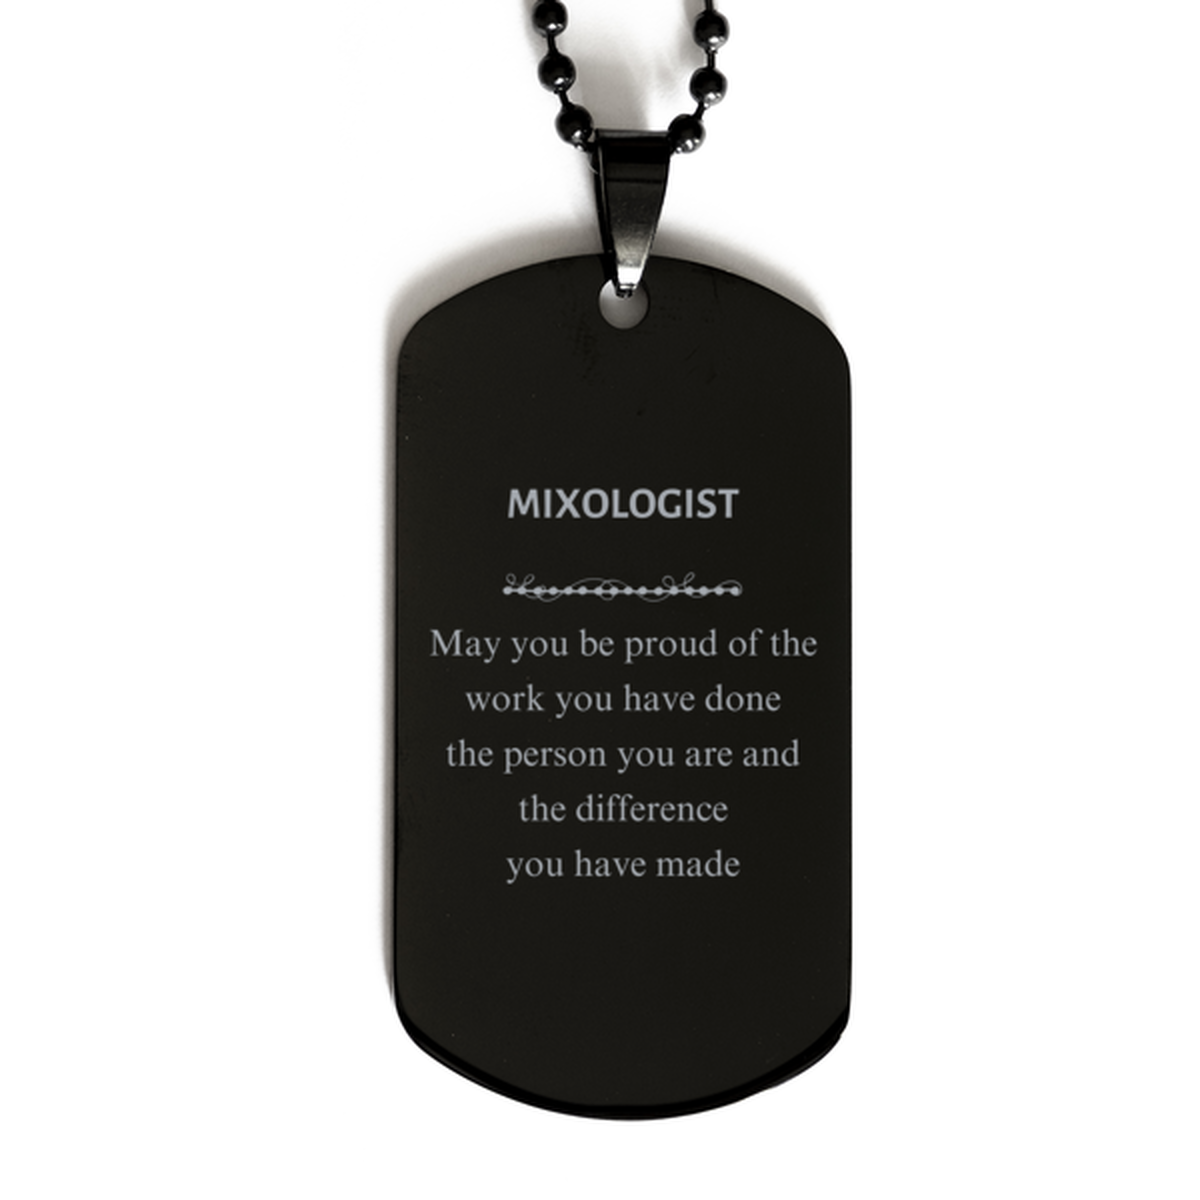 Mixologist May you be proud of the work you have done, Retirement Mixologist Black Dog Tag for Colleague Appreciation Gifts Amazing for Mixologist